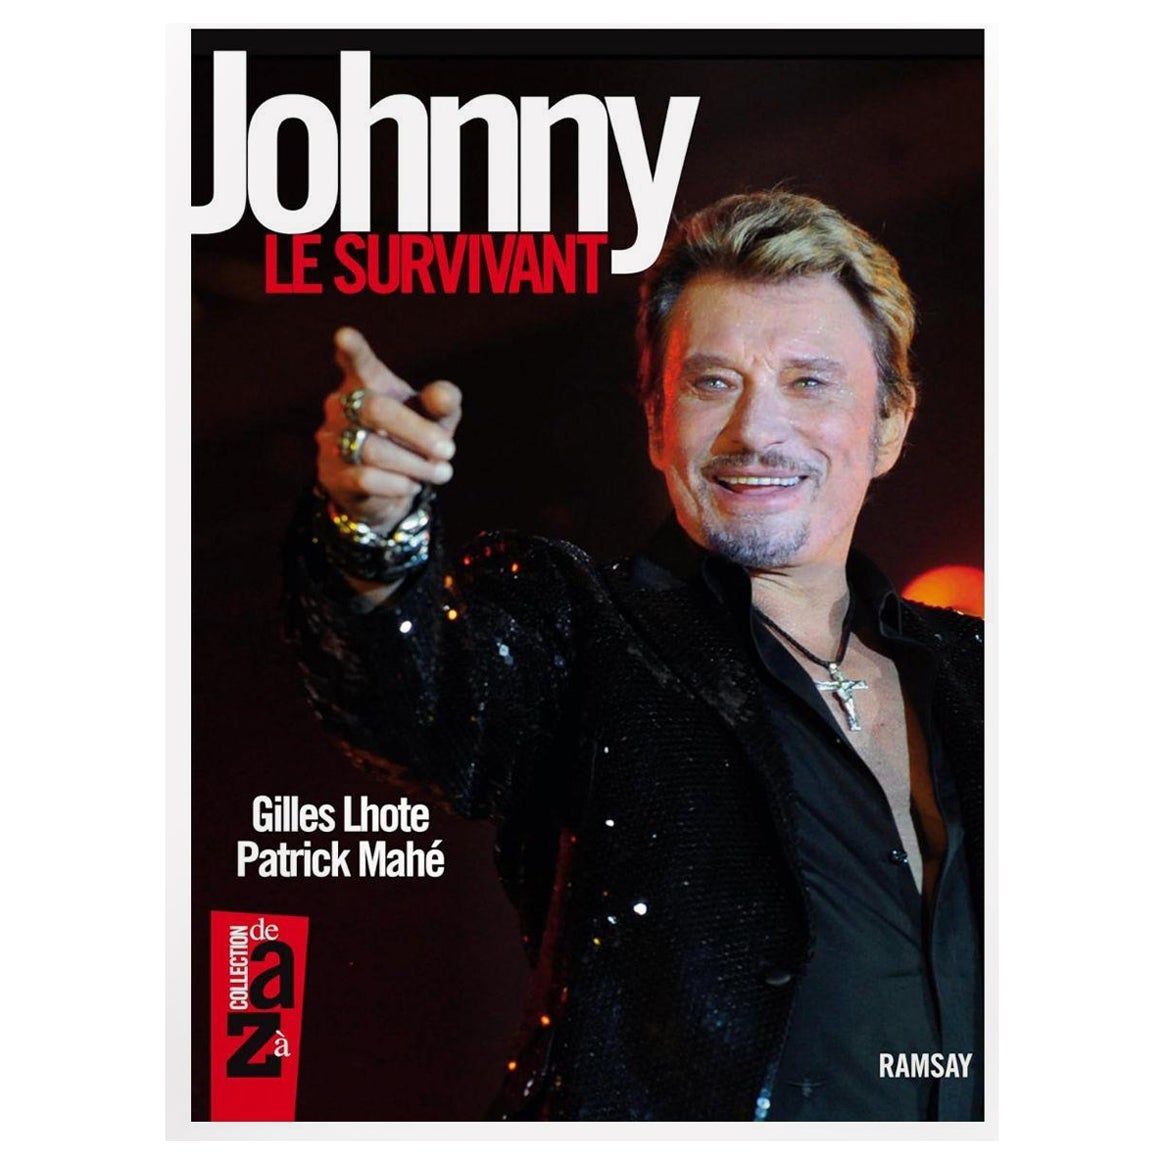 Johnny Halliday Johnny Le Survivant French Edition Paperback 1st Edition